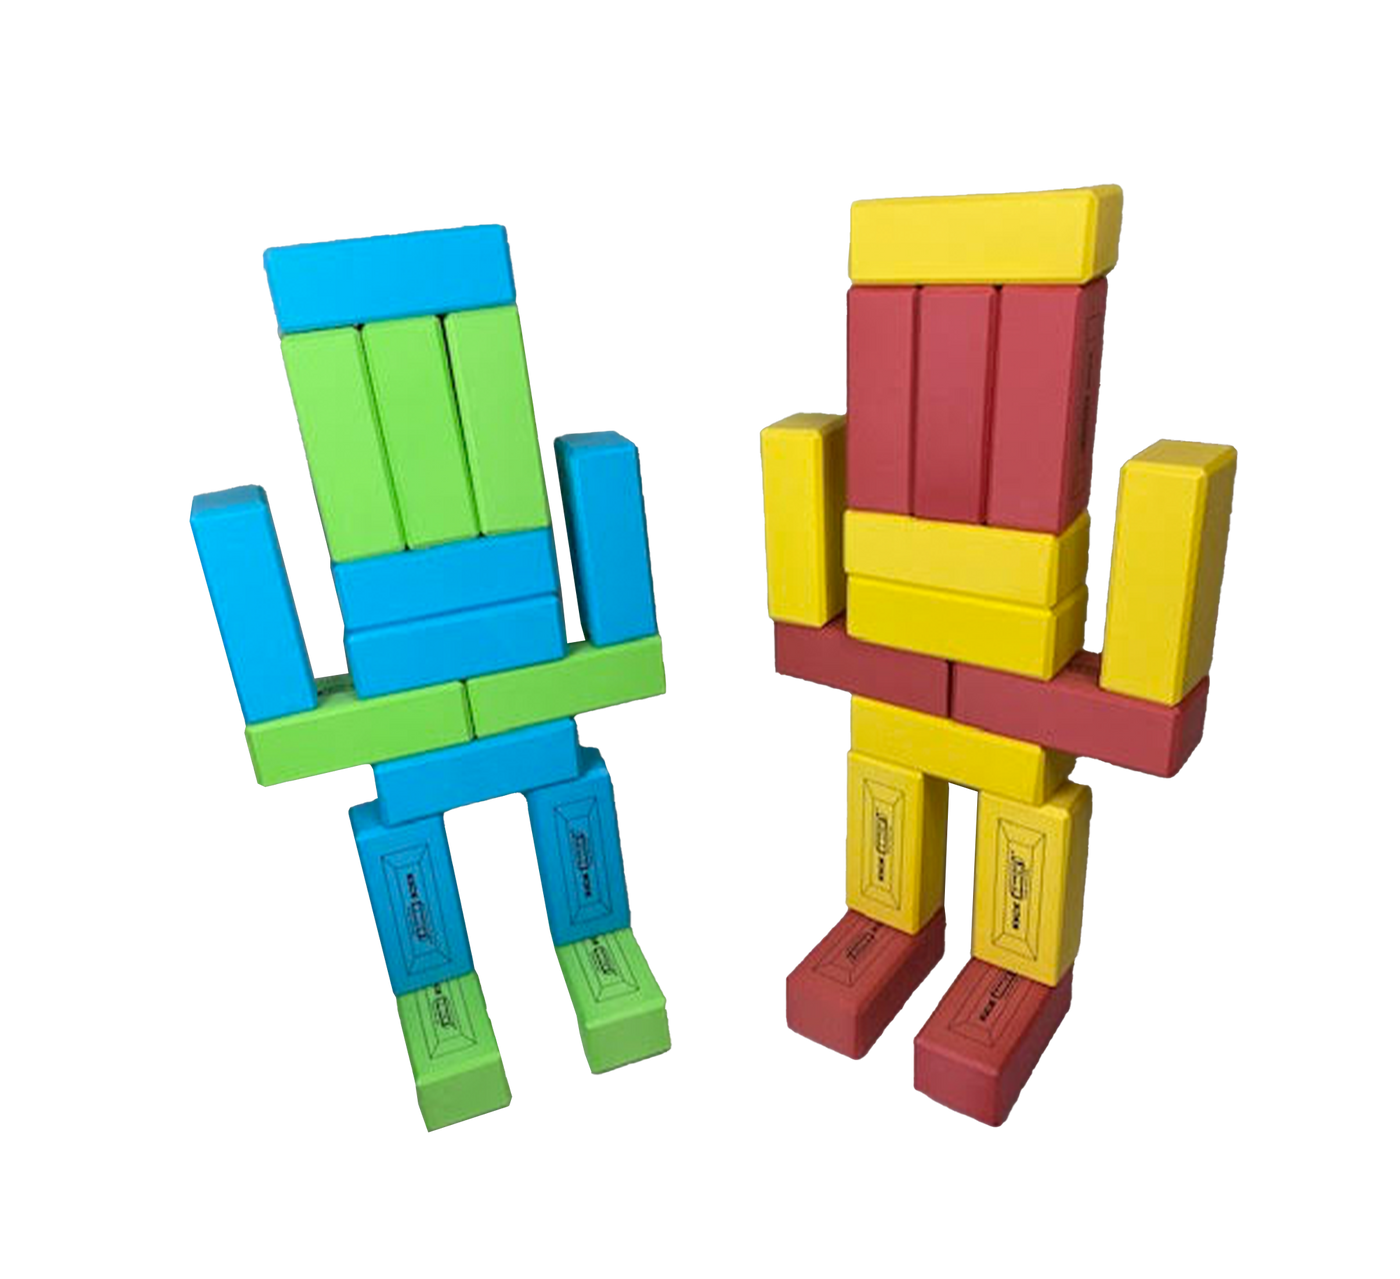 2 robots built from large toy building bricks